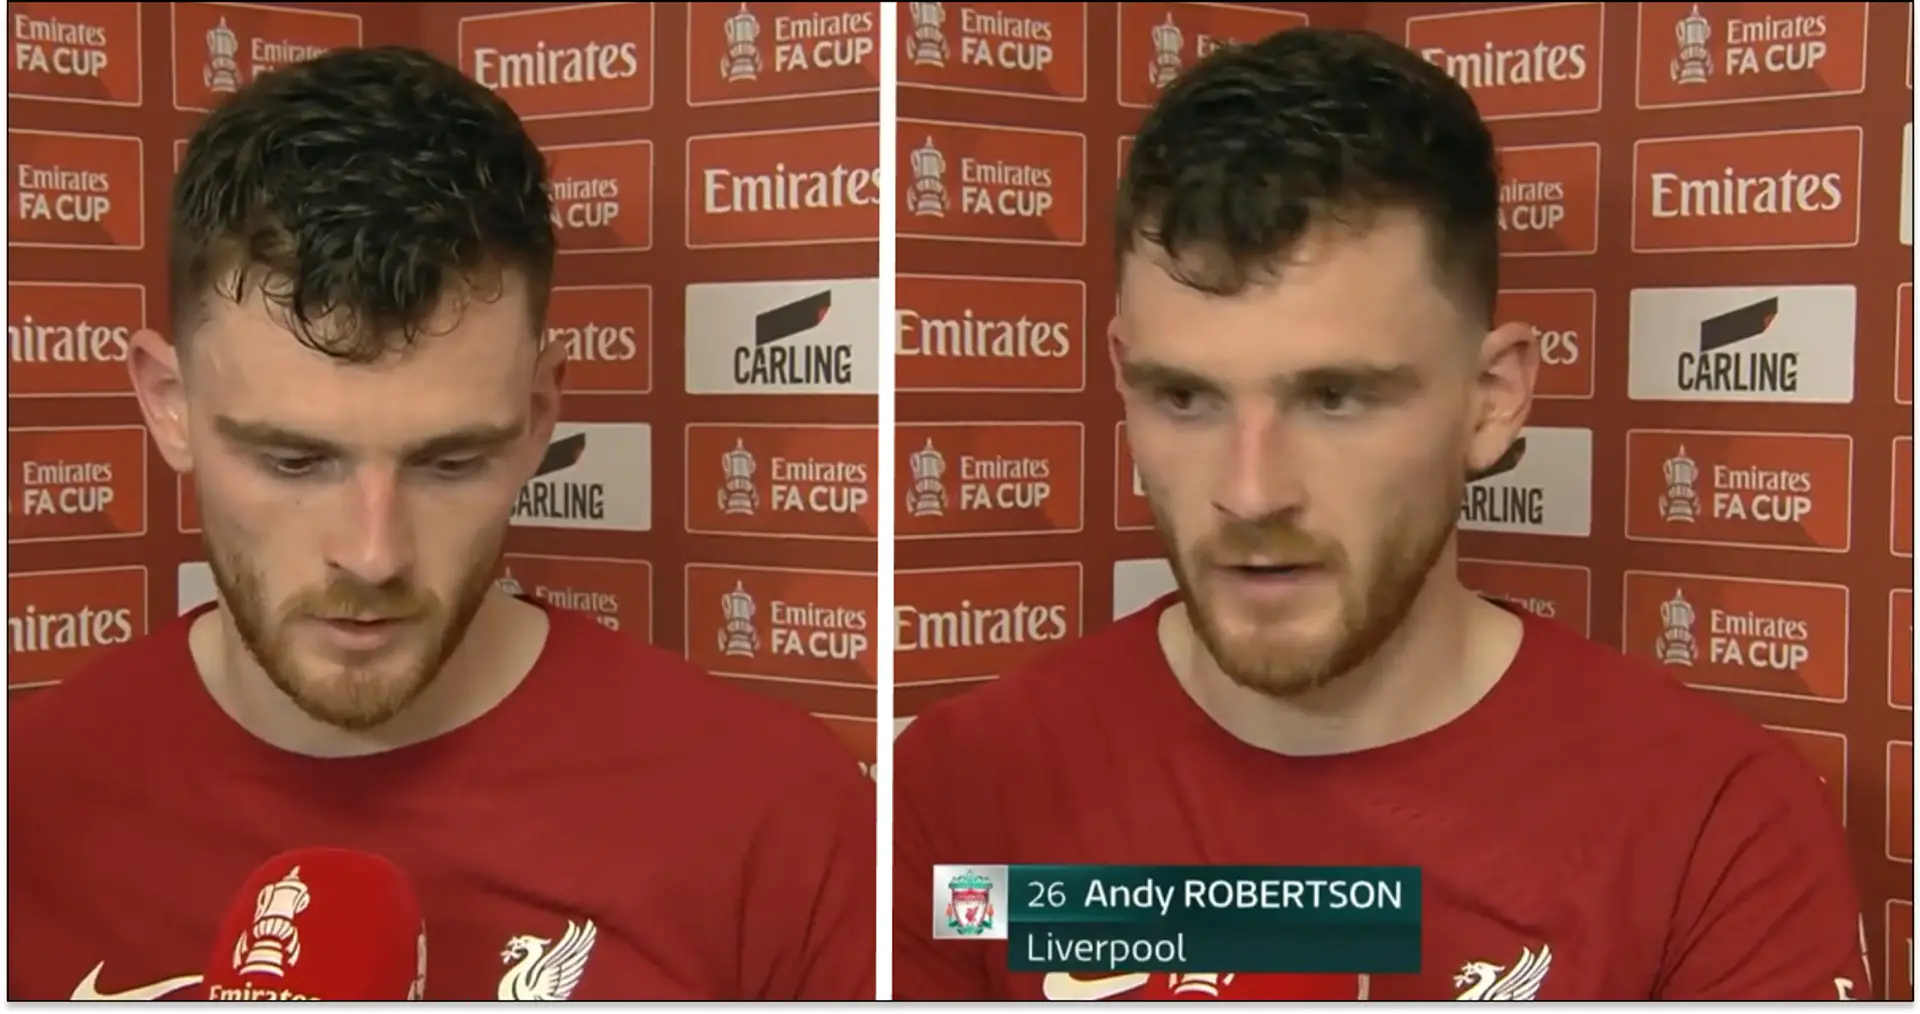 'I feel sorry for the fans': Robertson reacts to Brighton loss